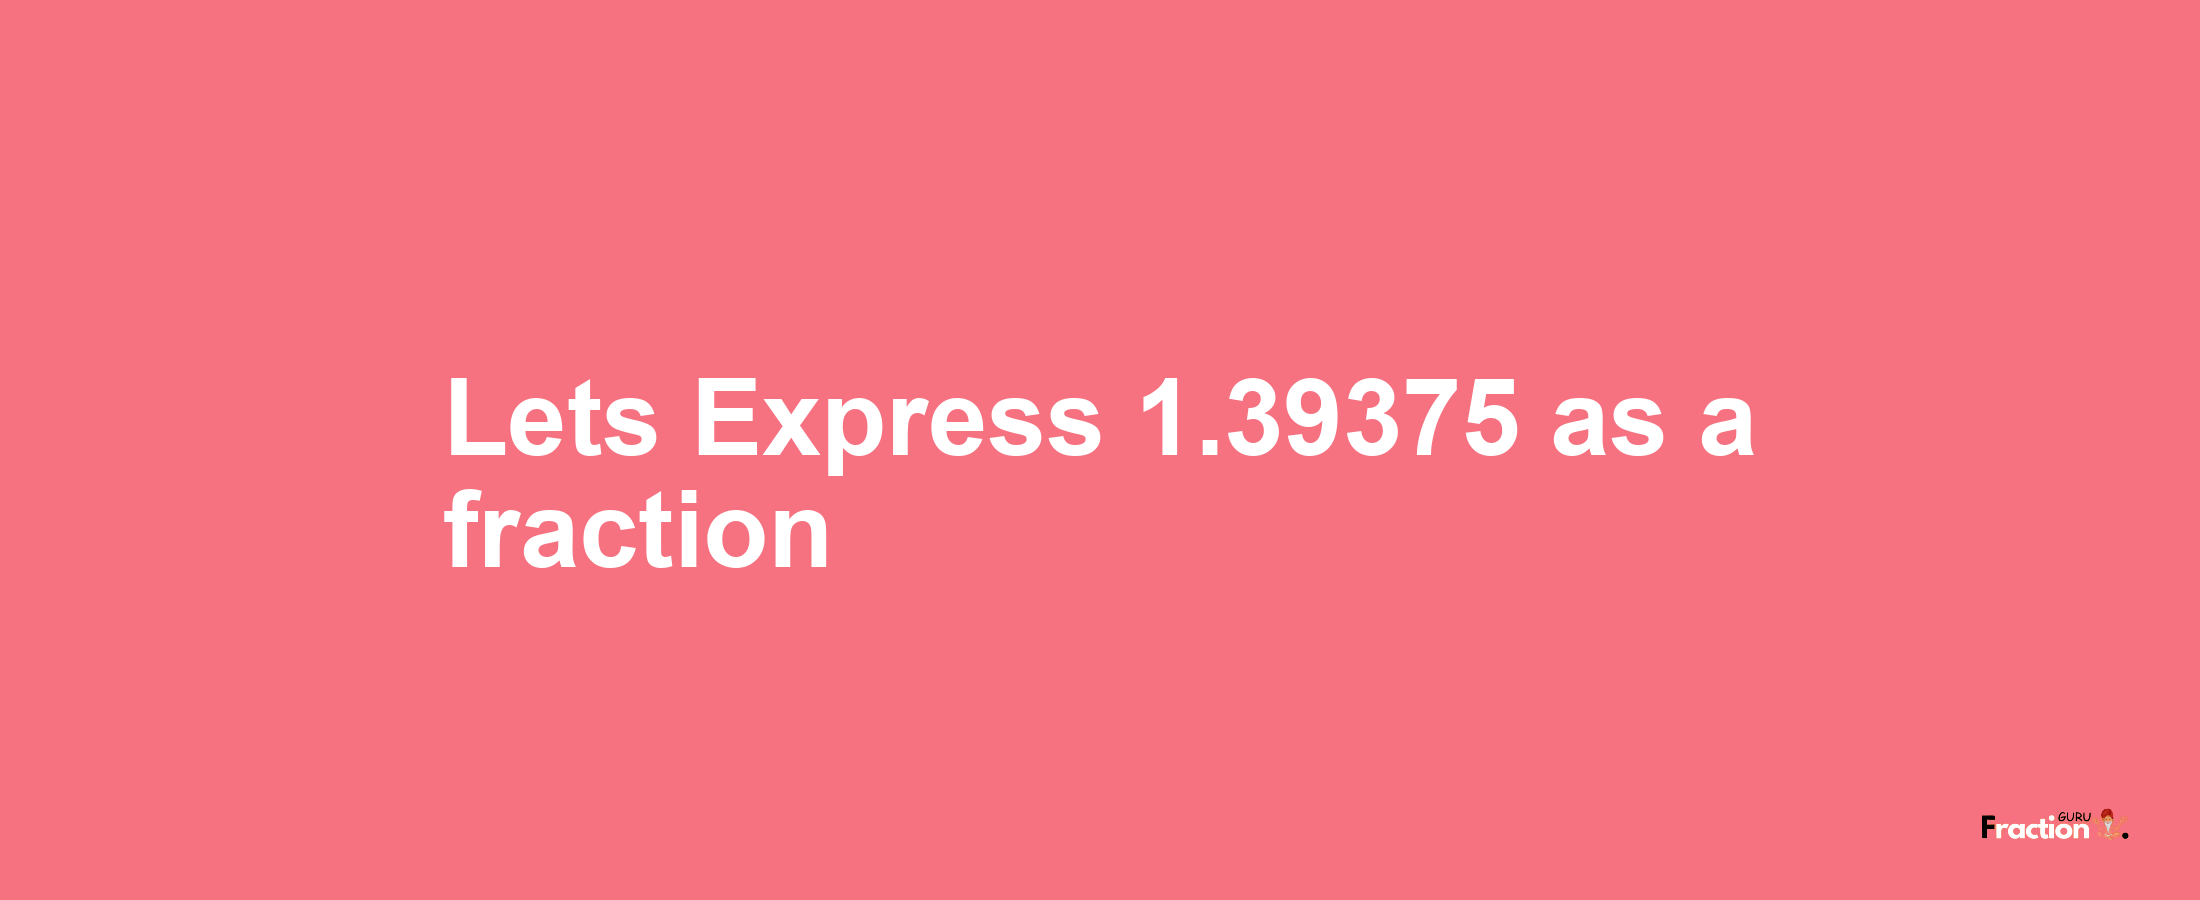 Lets Express 1.39375 as afraction